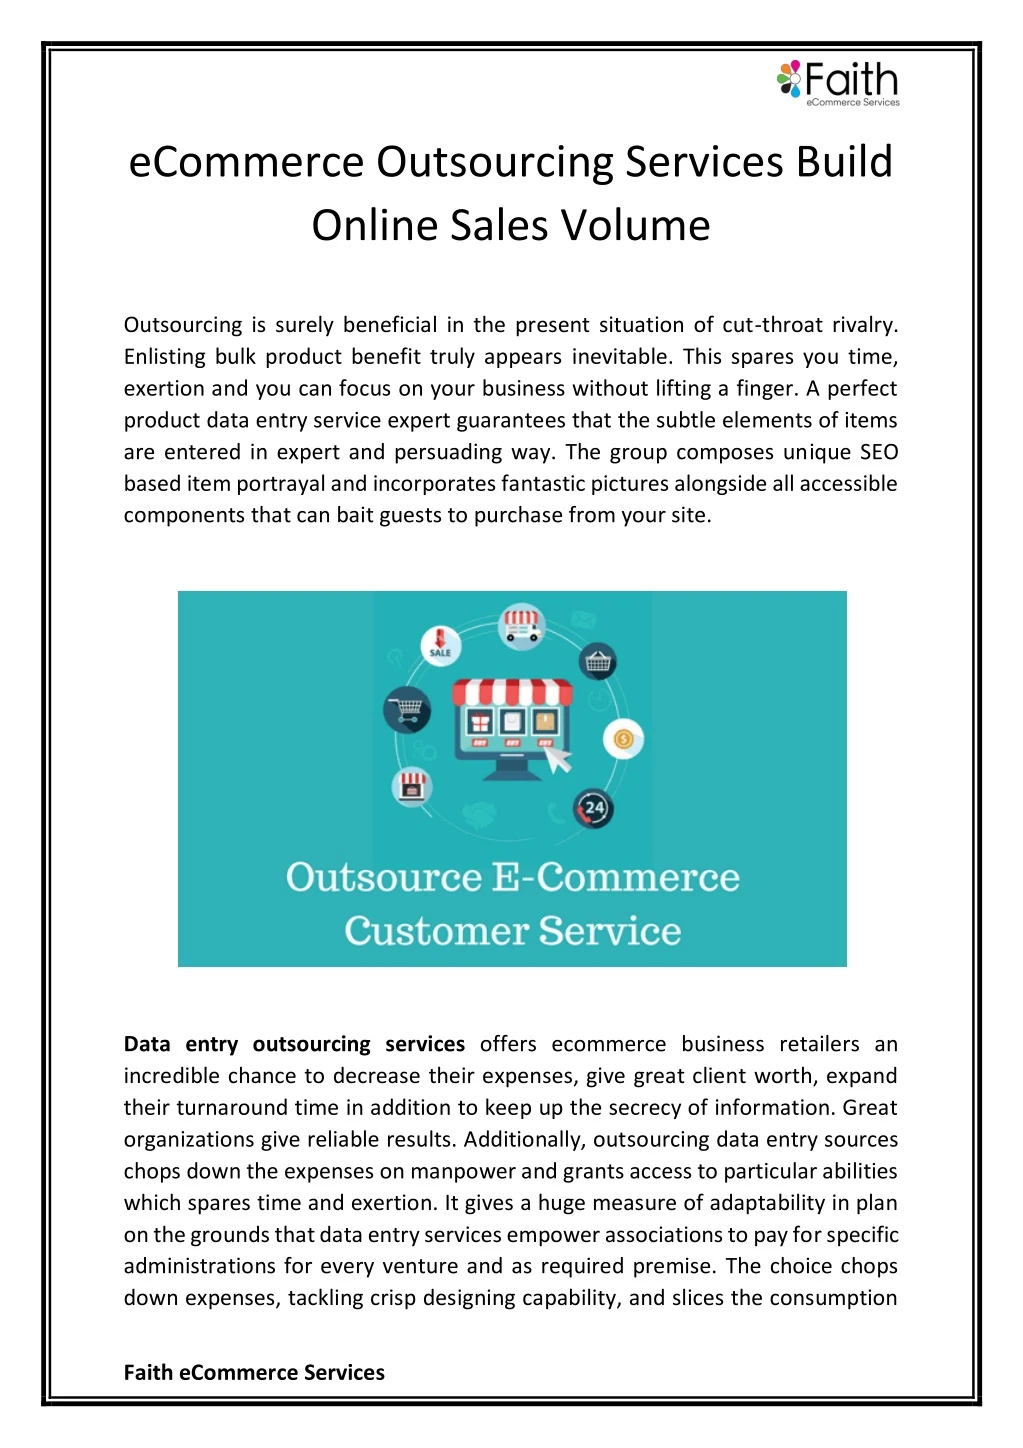 ecommerce outsourcing services build online sales